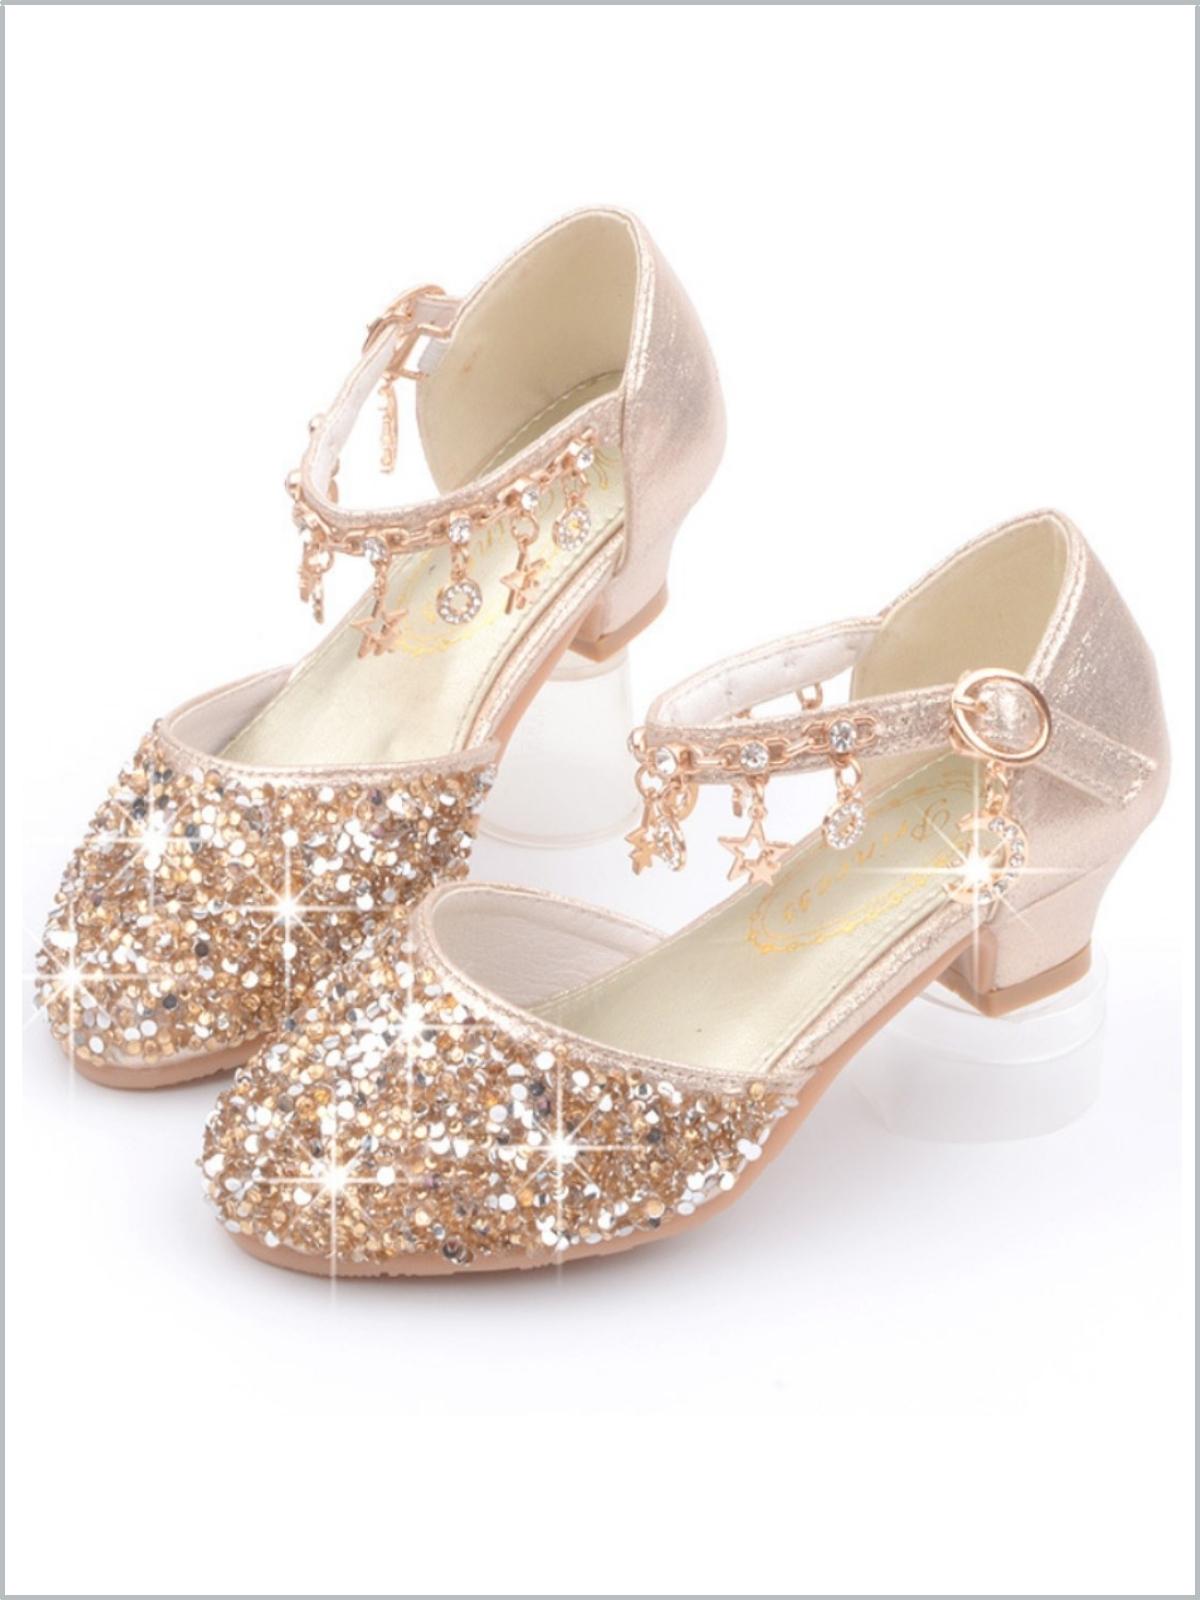 Girls My Shiny Shoes Glittery Flats with Charms - Mia Belle Girls